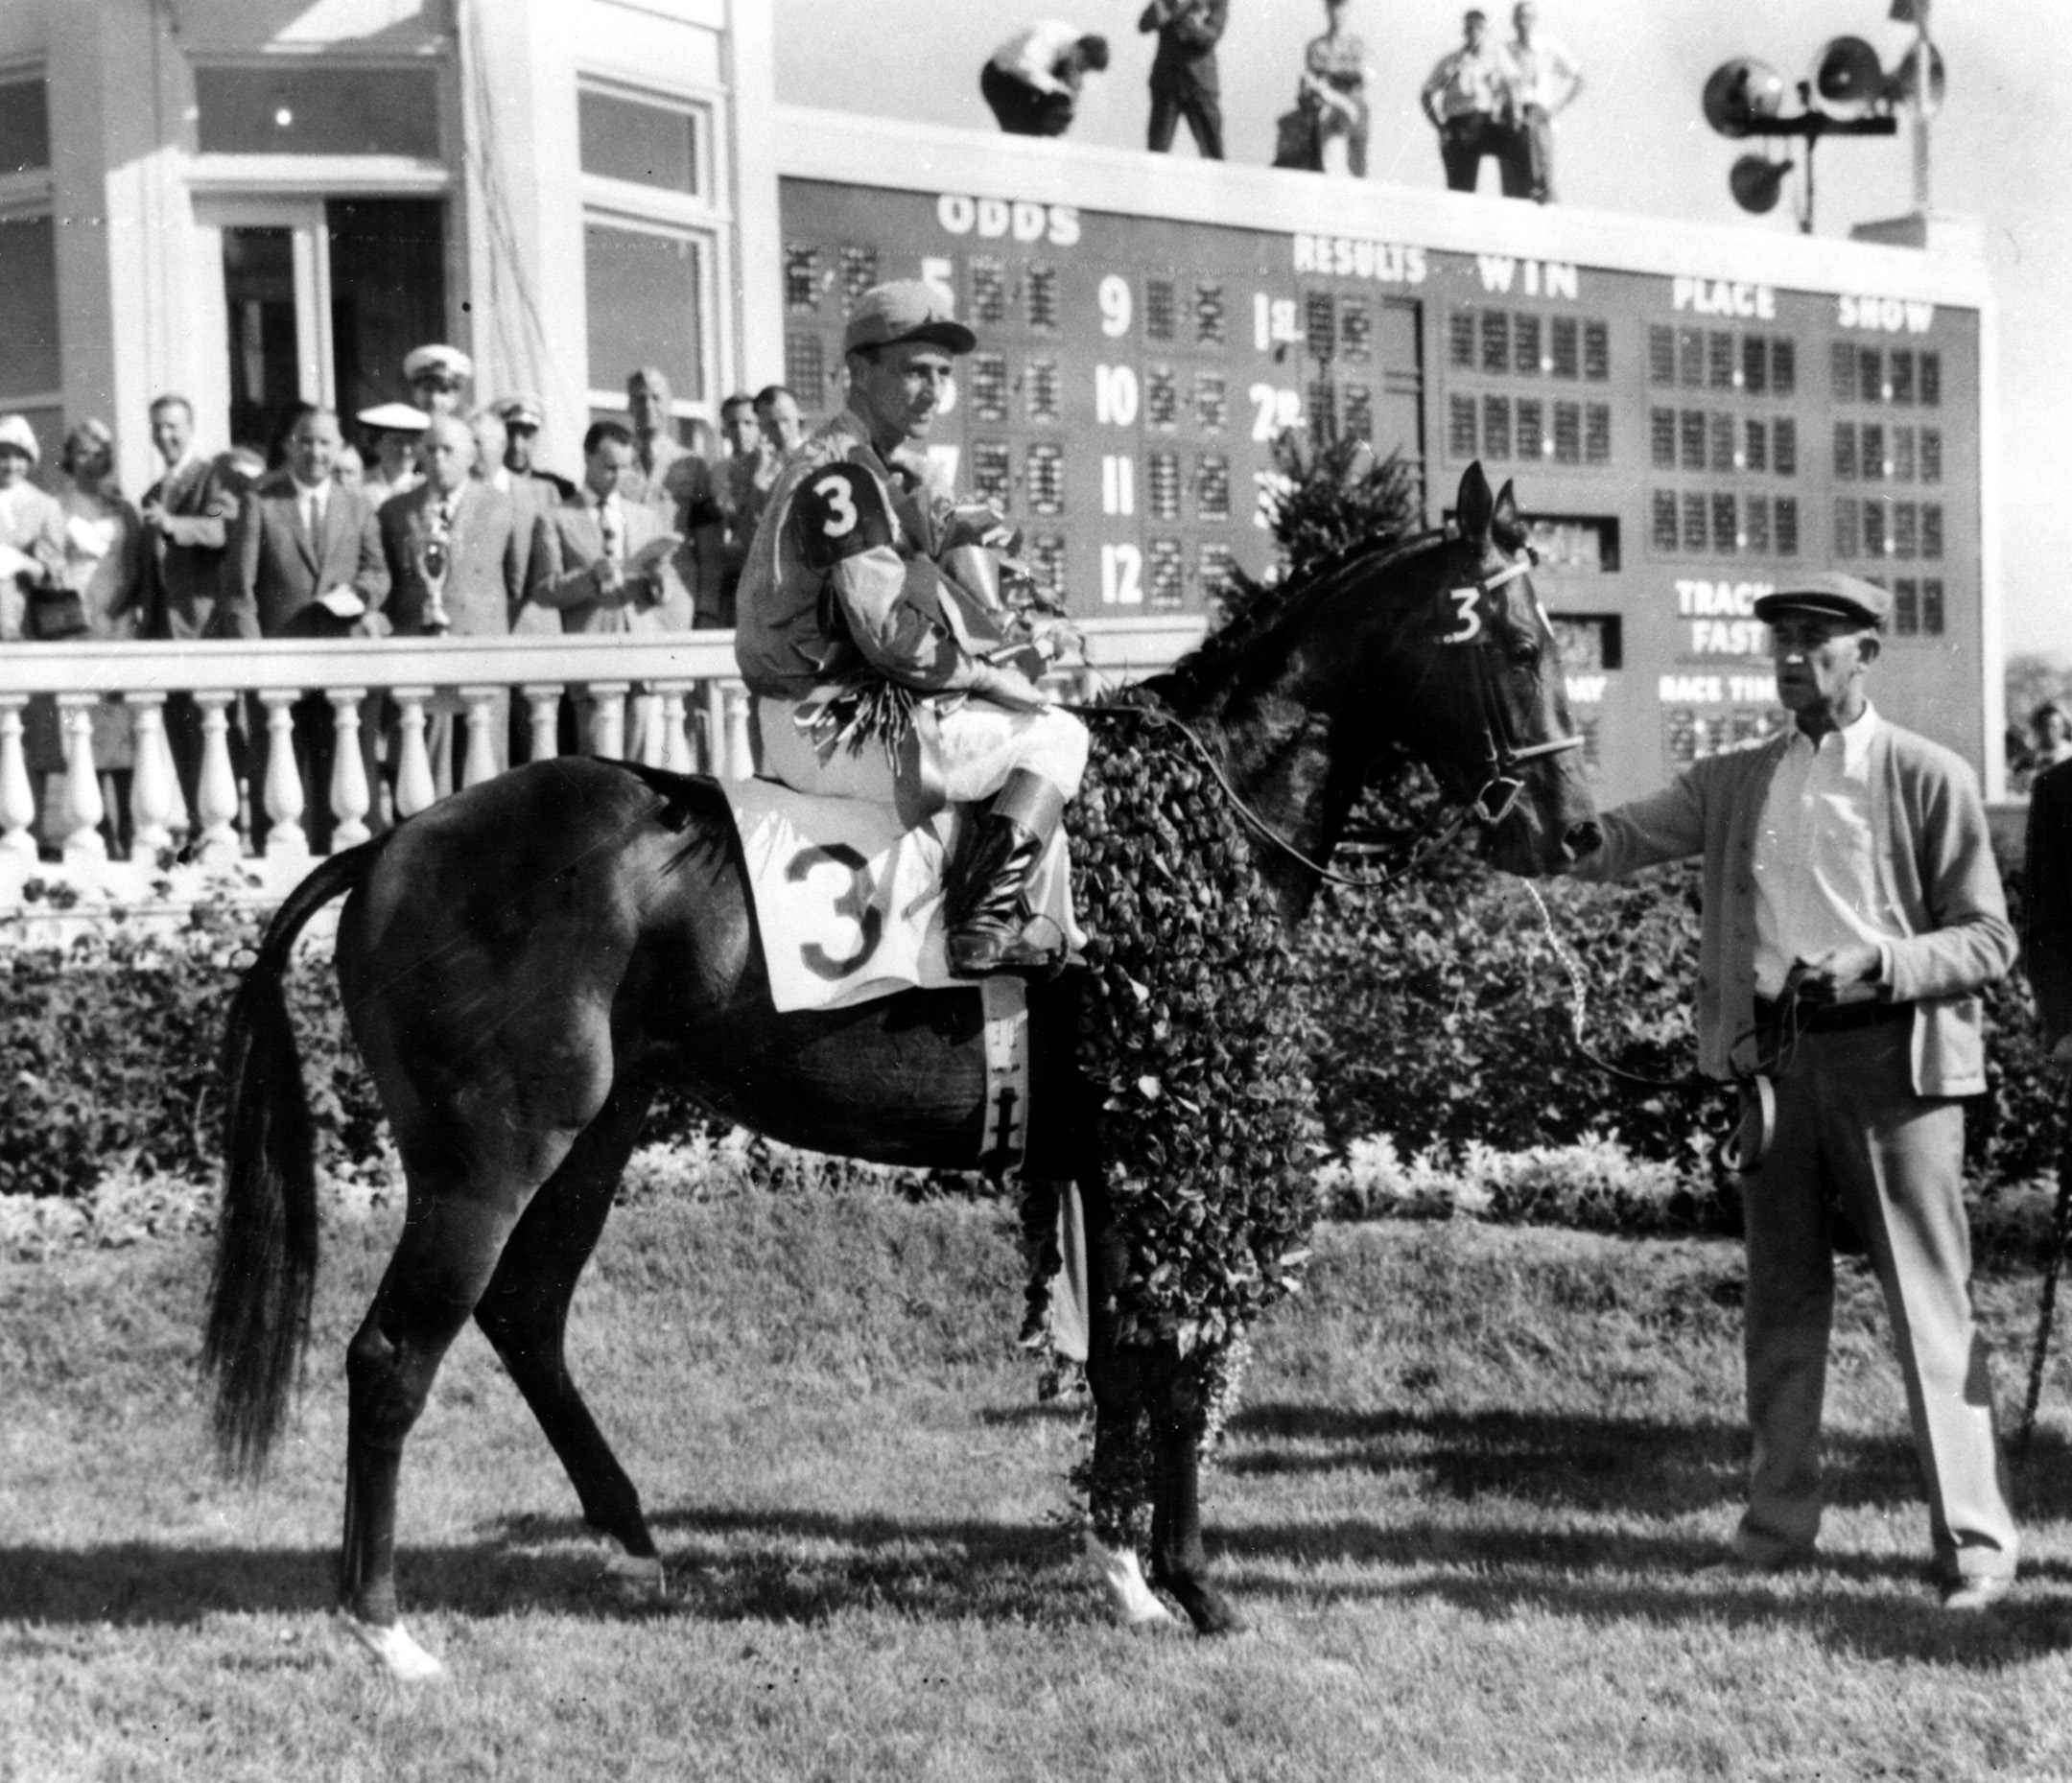 Needles (Dave Erb up) in the winner's circle for the 1956 Kentucky Derby (Keeneland Library Morgan Collection/Museum Collection)